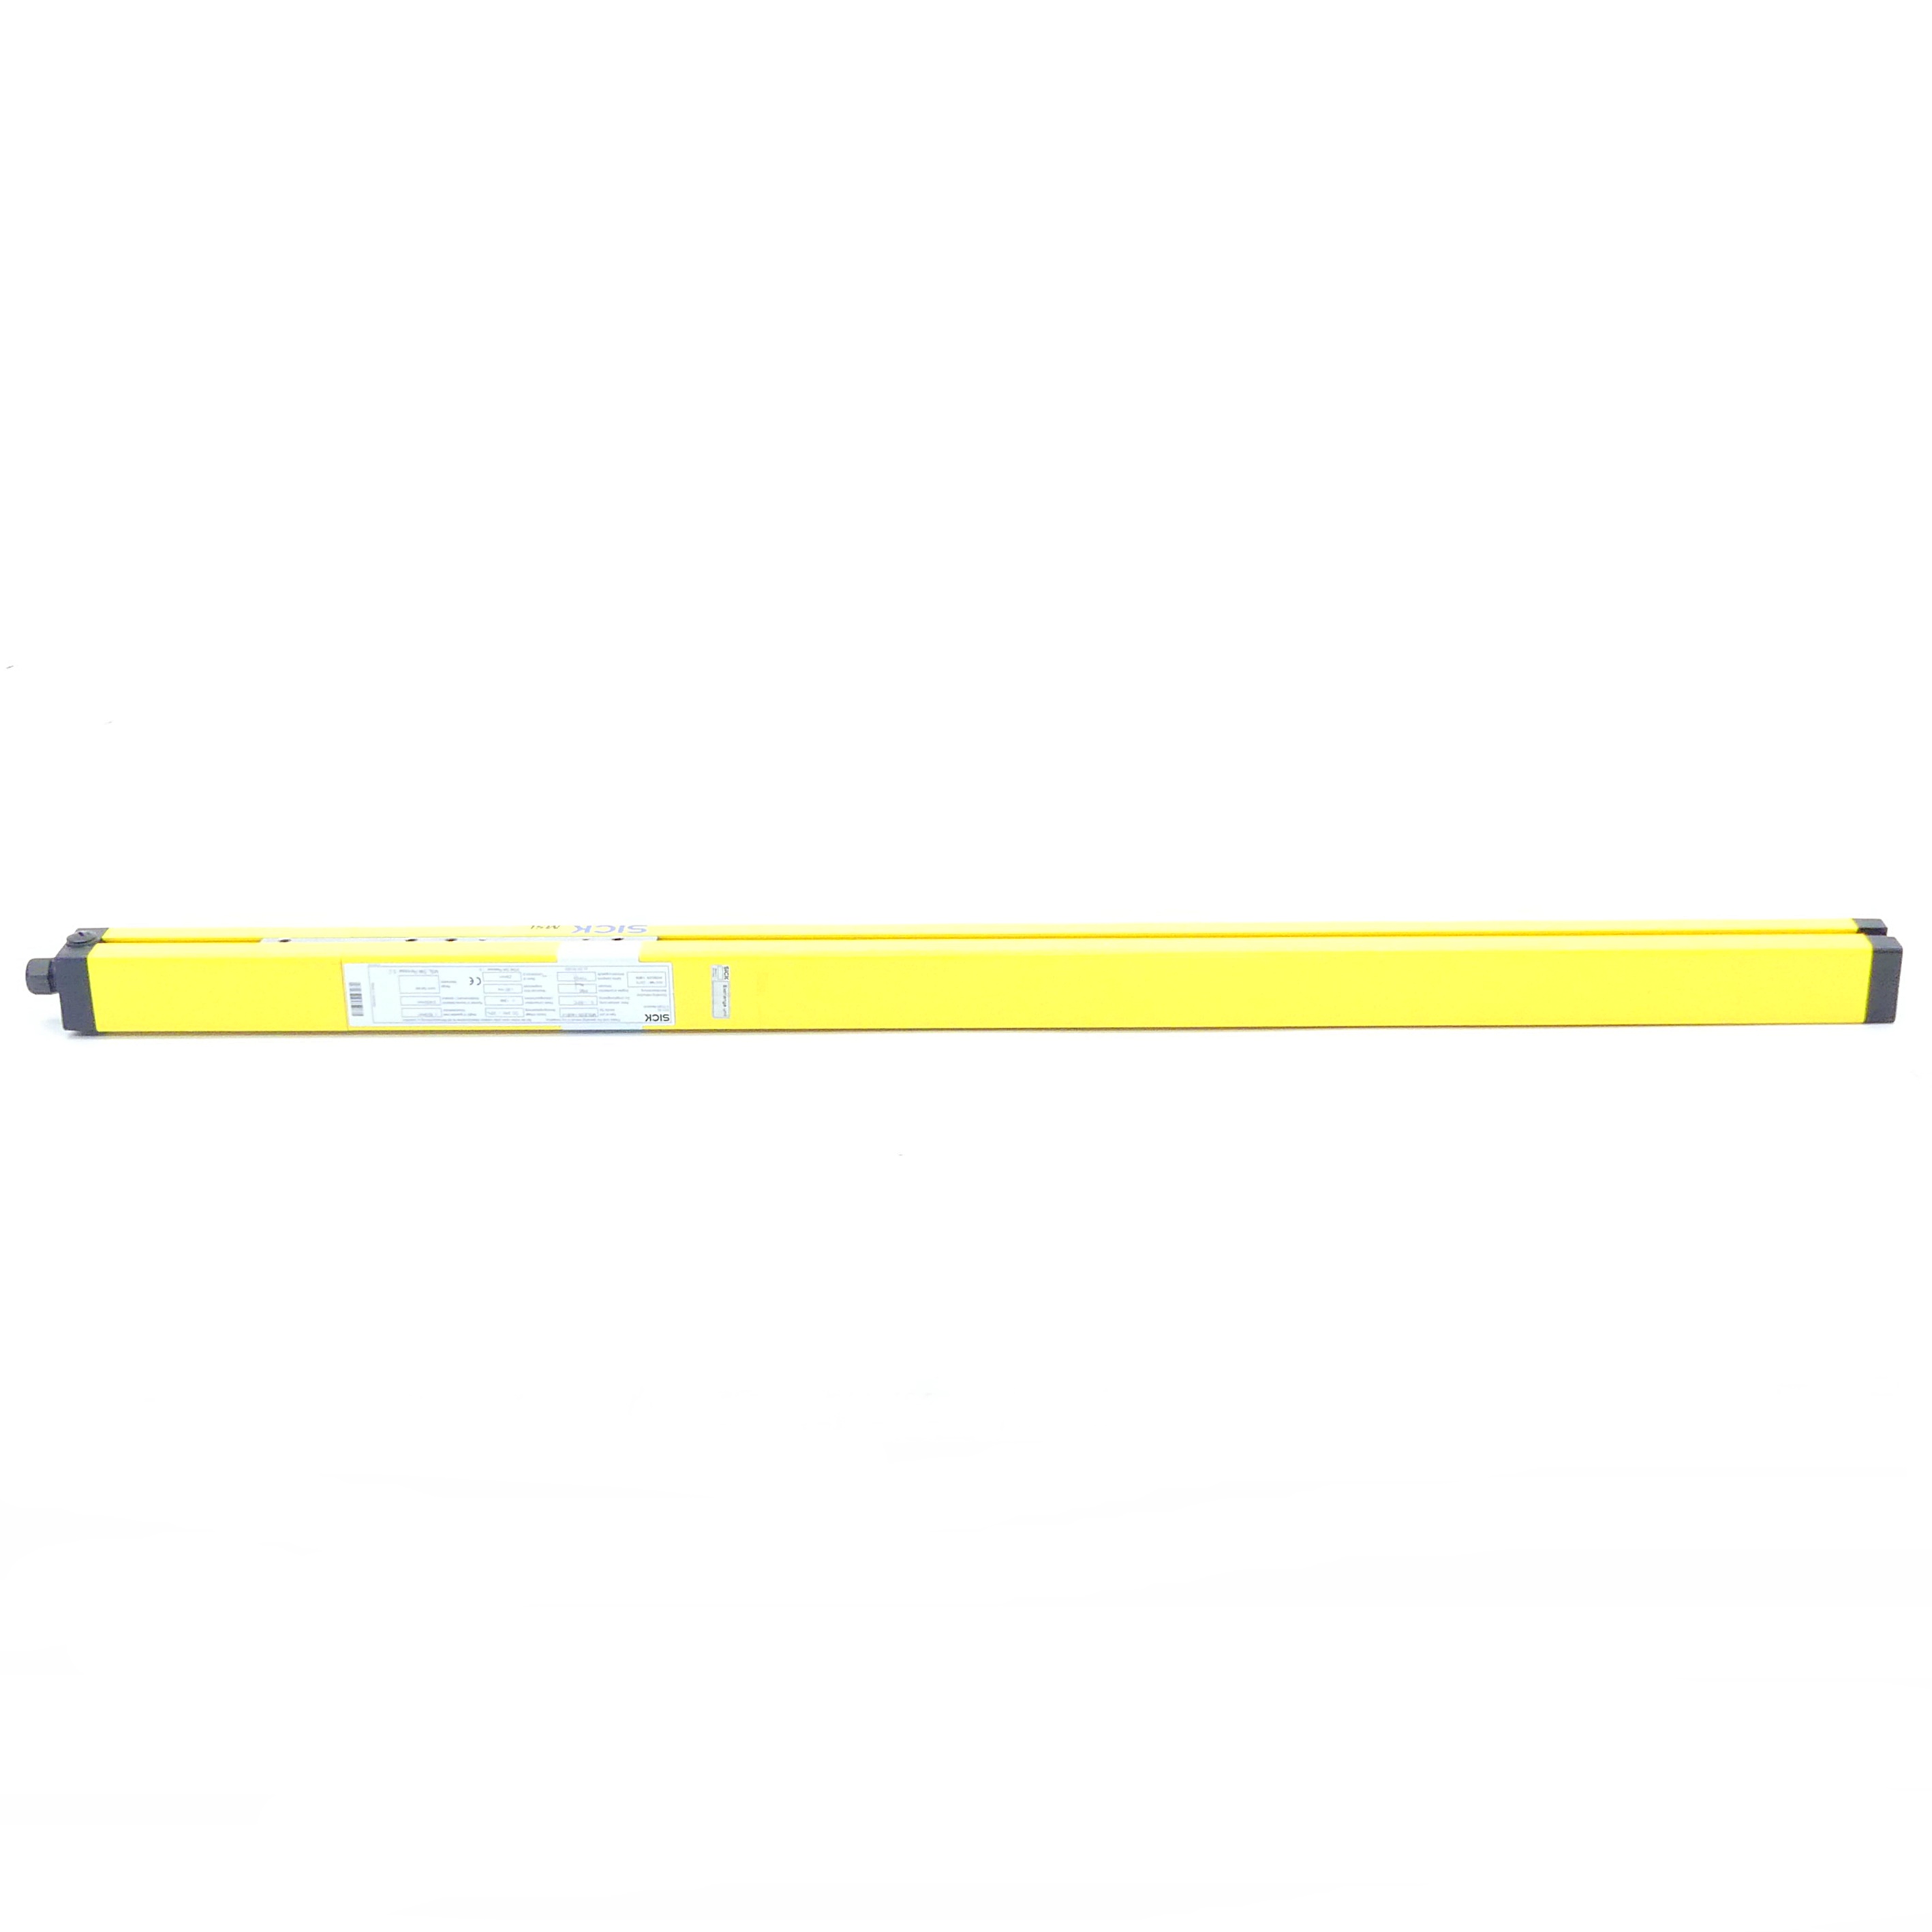 Safety light Curtain receiver MSLE03-14061A 